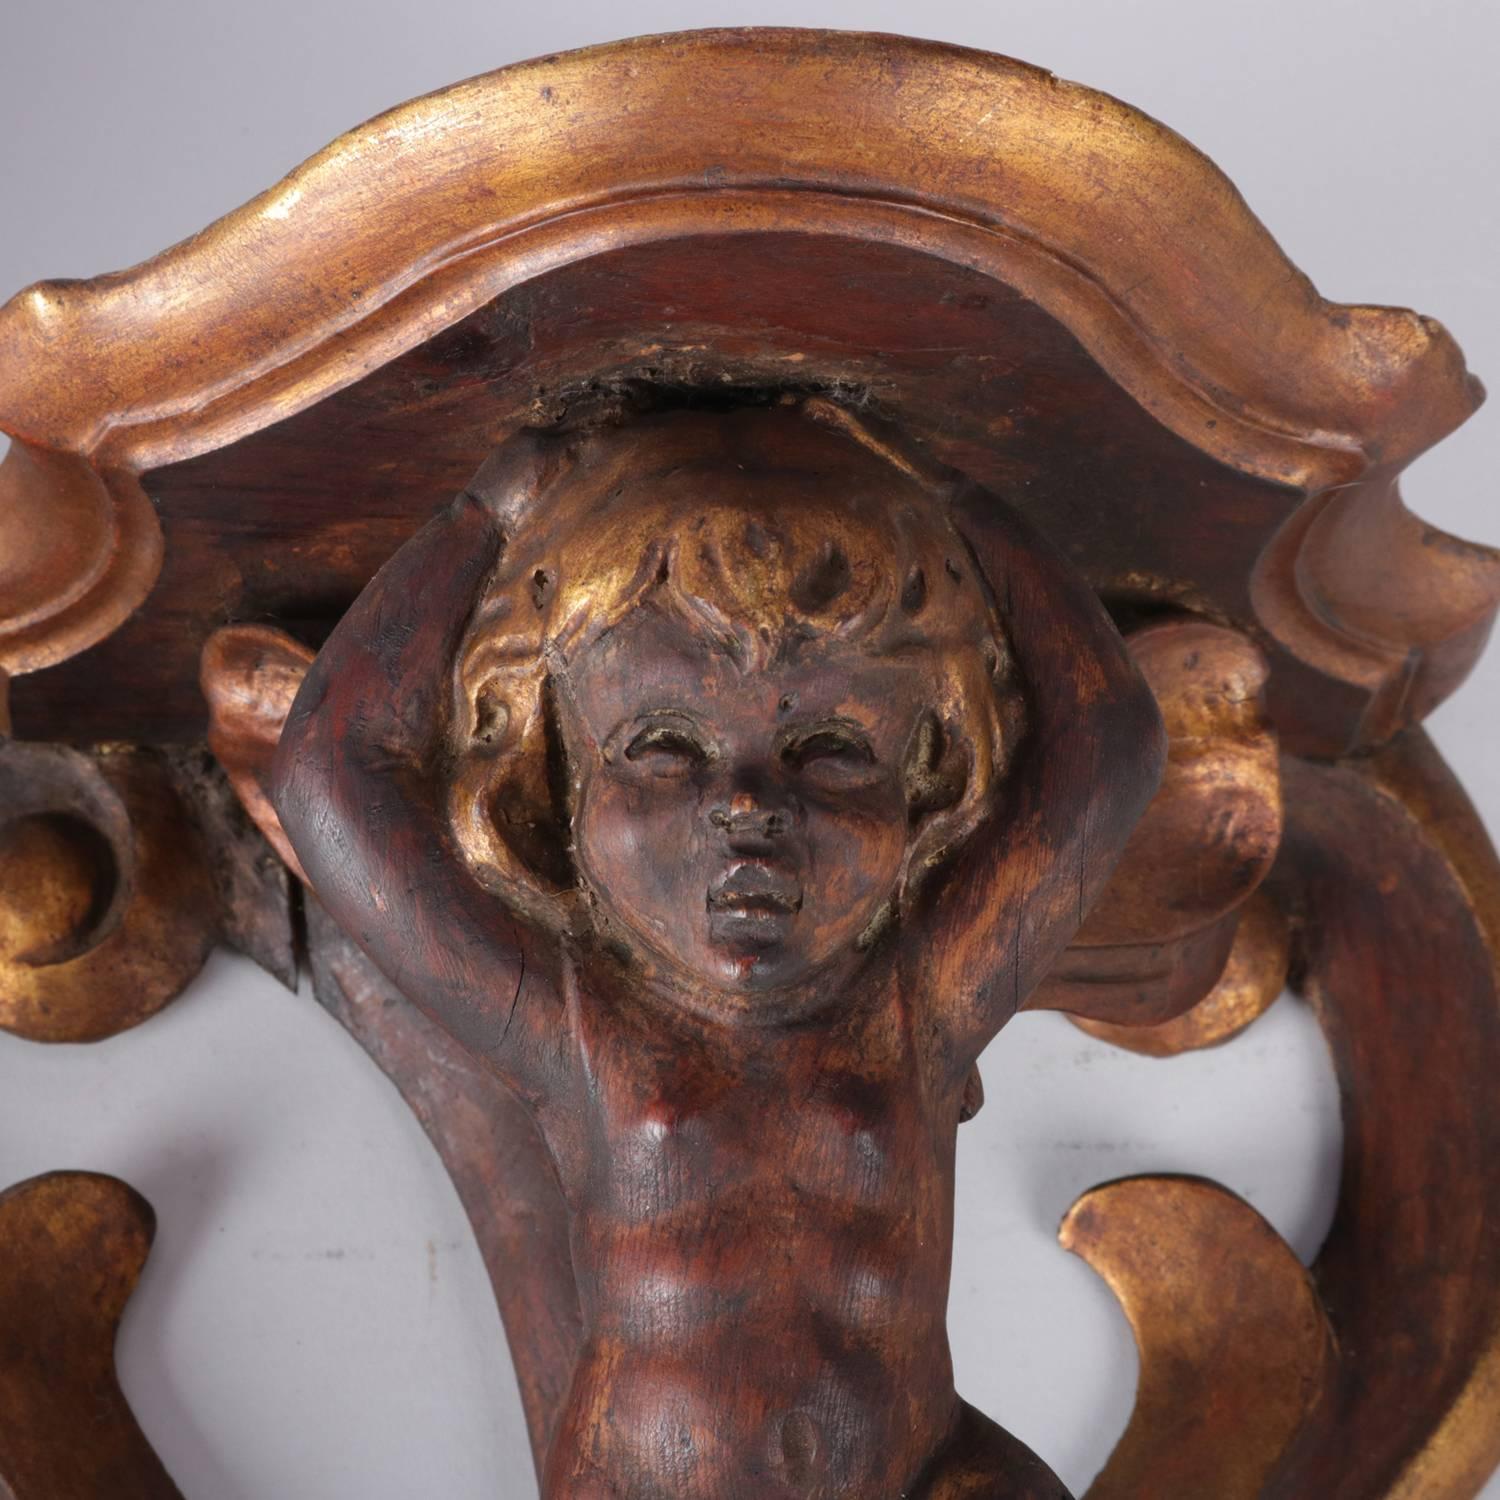 Pair of antique Italian Baroque figural gesso and carved wood candle sconces feature scroll form back with winged cherub supporting candle display platform, painted with gilt highlights, 19th century.

Measure: 13.5